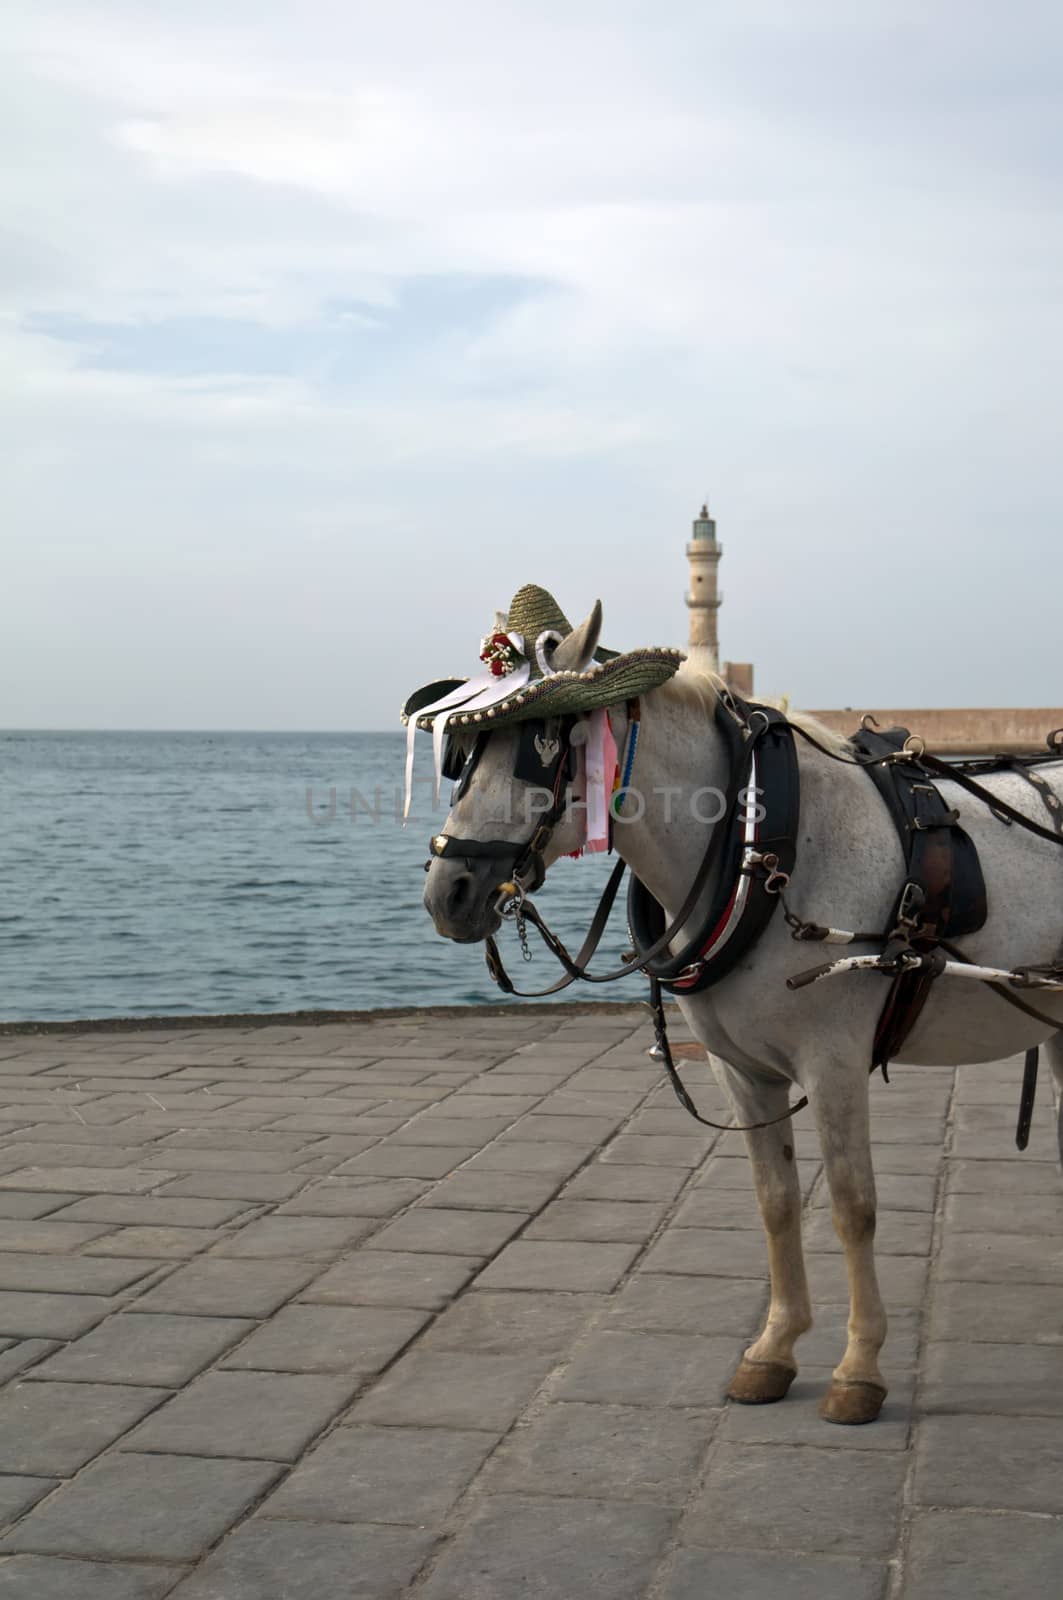 Coach before chania lighthouse . by LarisaP